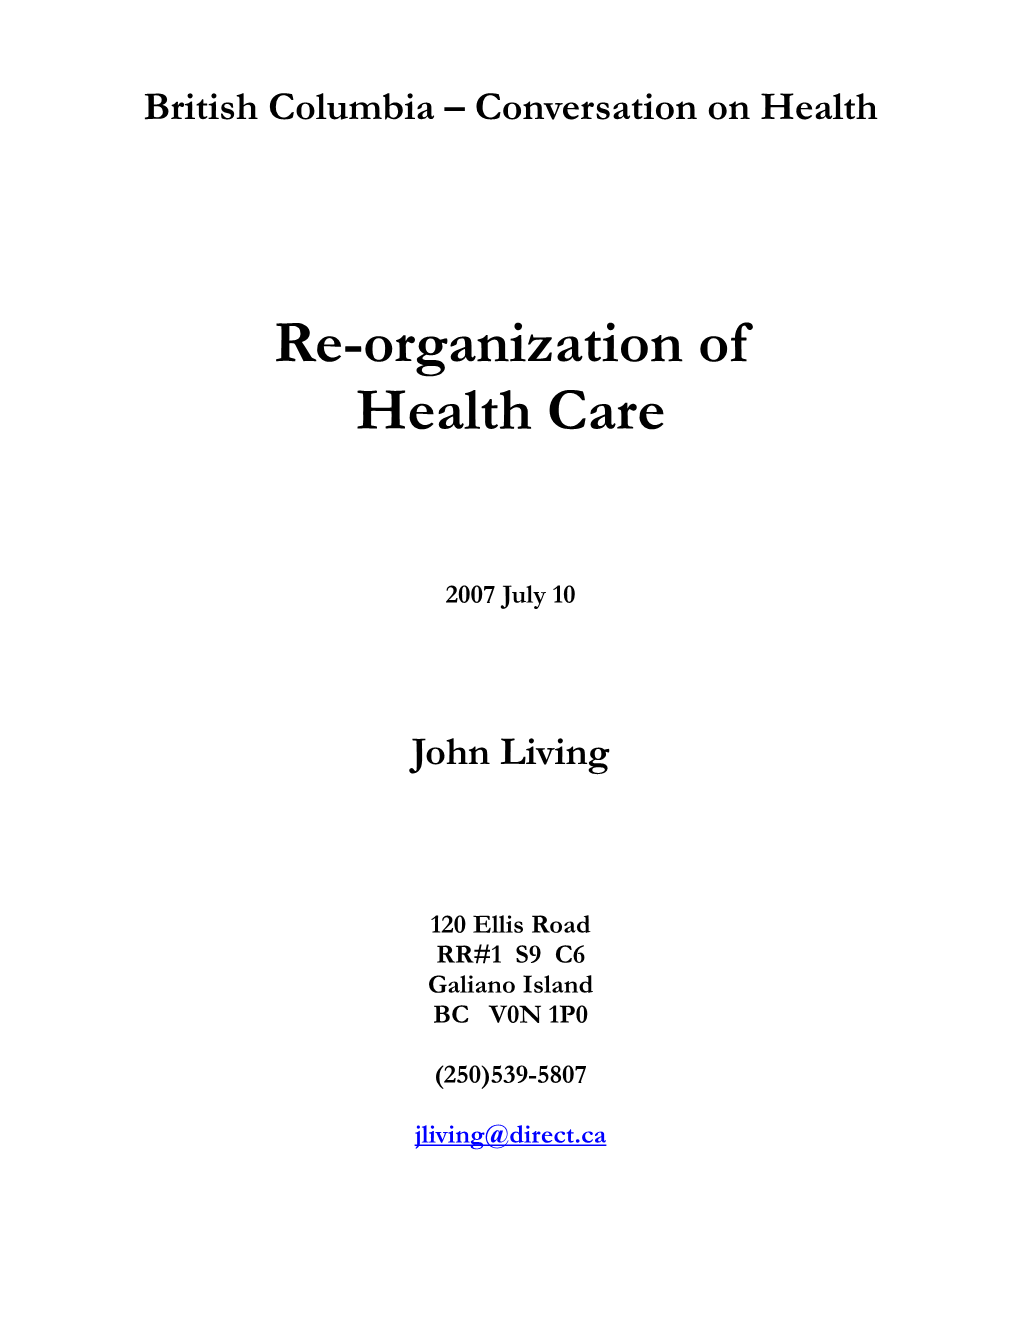 Re-Organization of Health Care